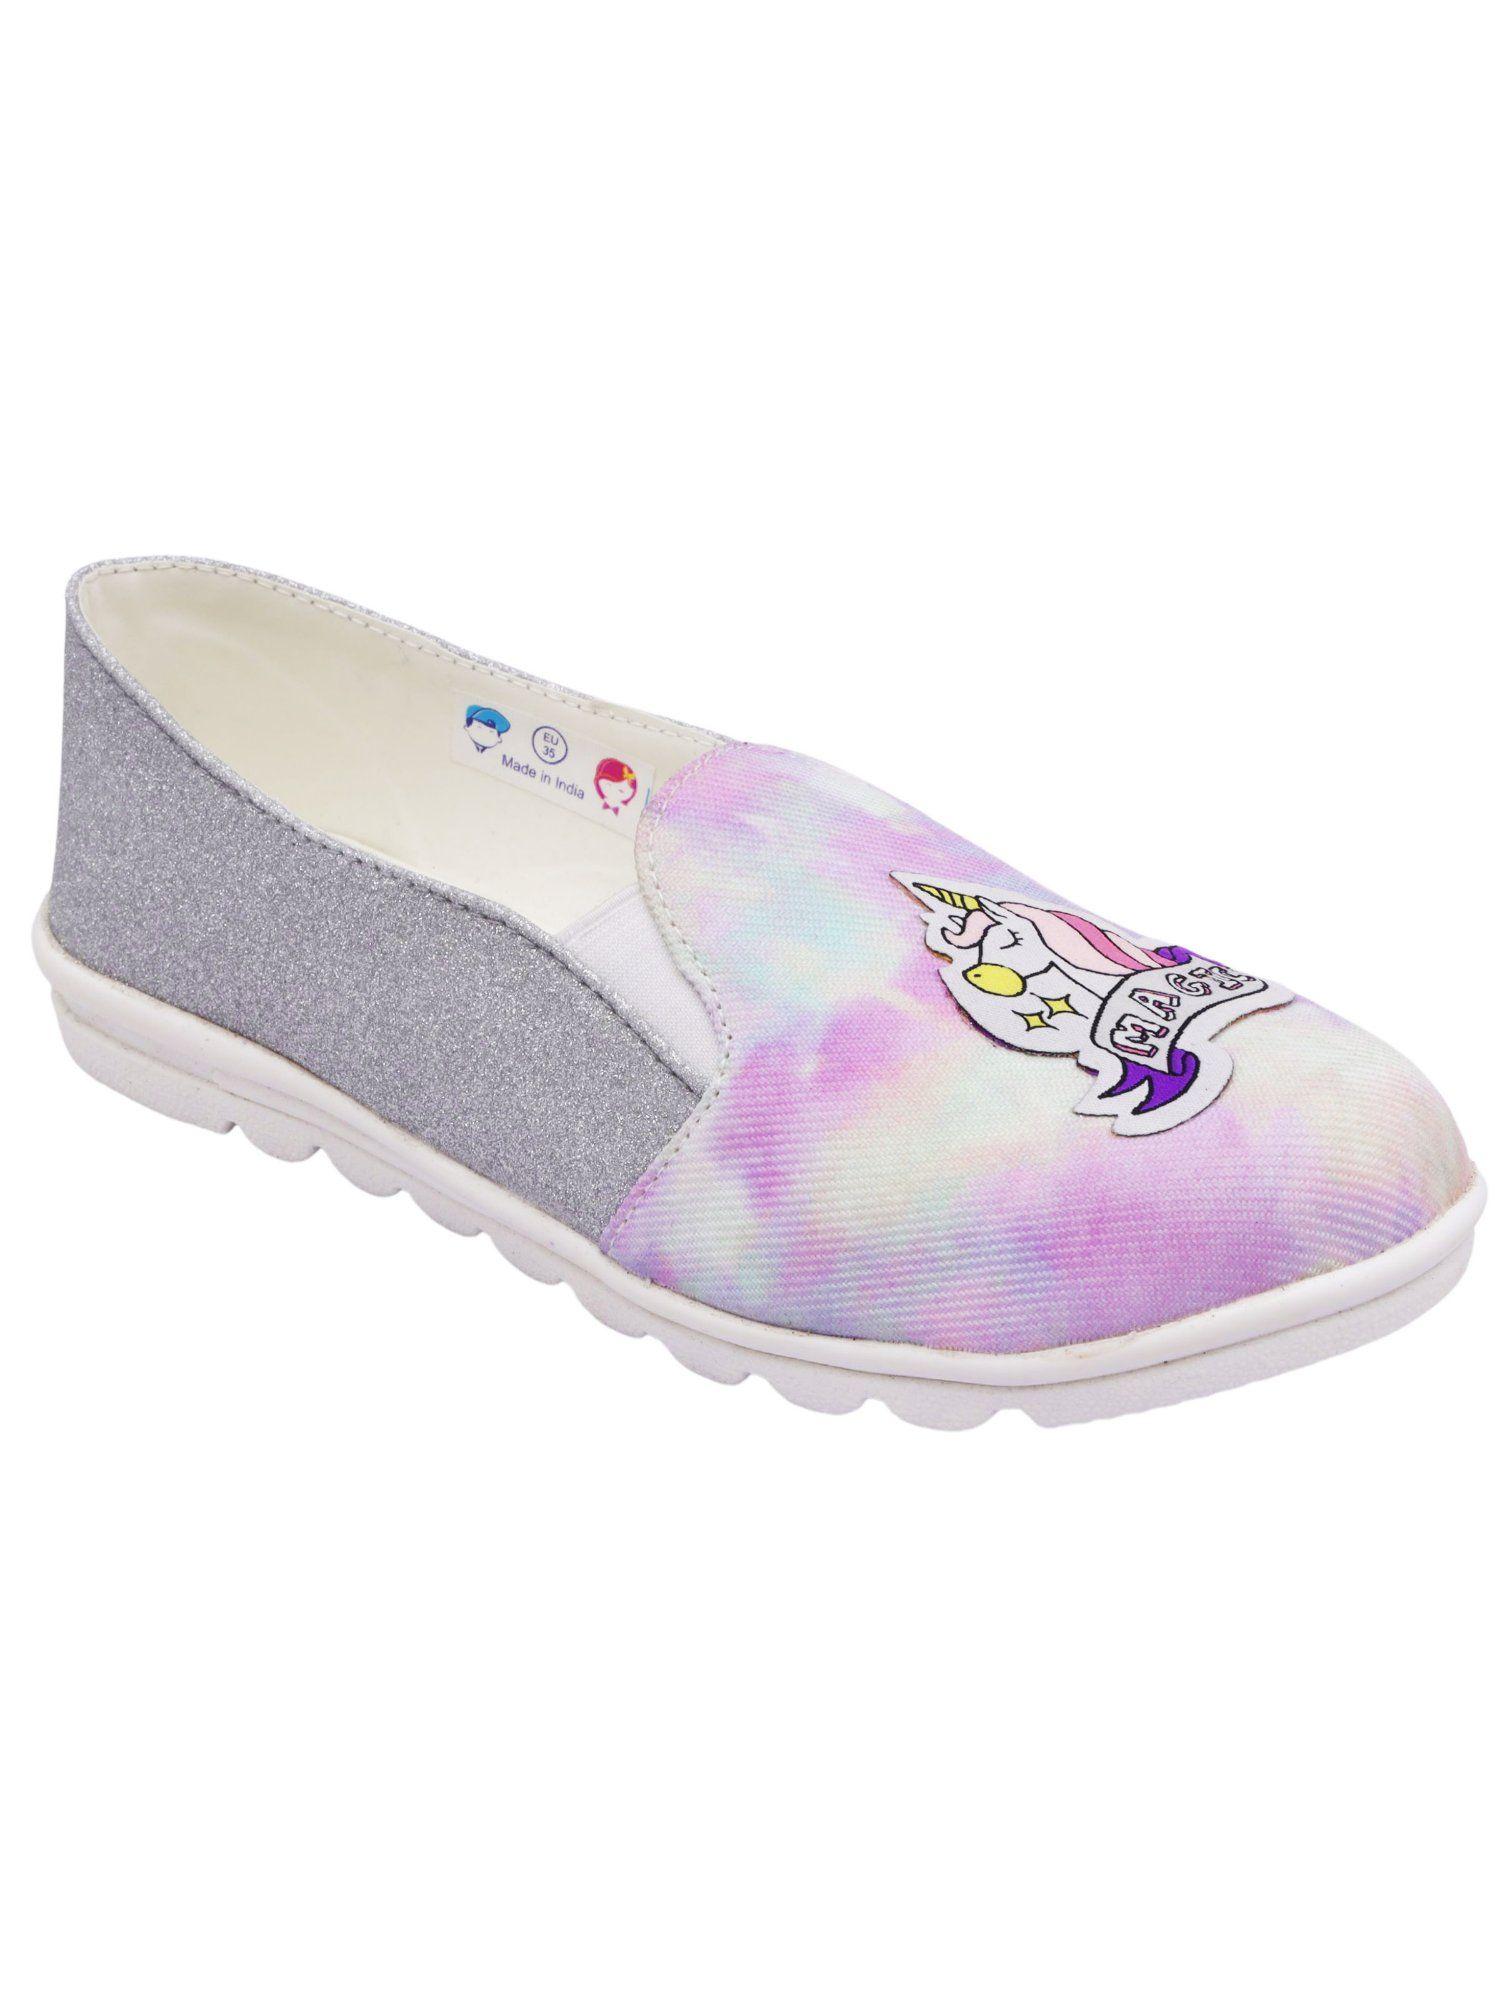 lavender-tie-and-die-slip-on-shoes-for-girls-with-unicorn-applique